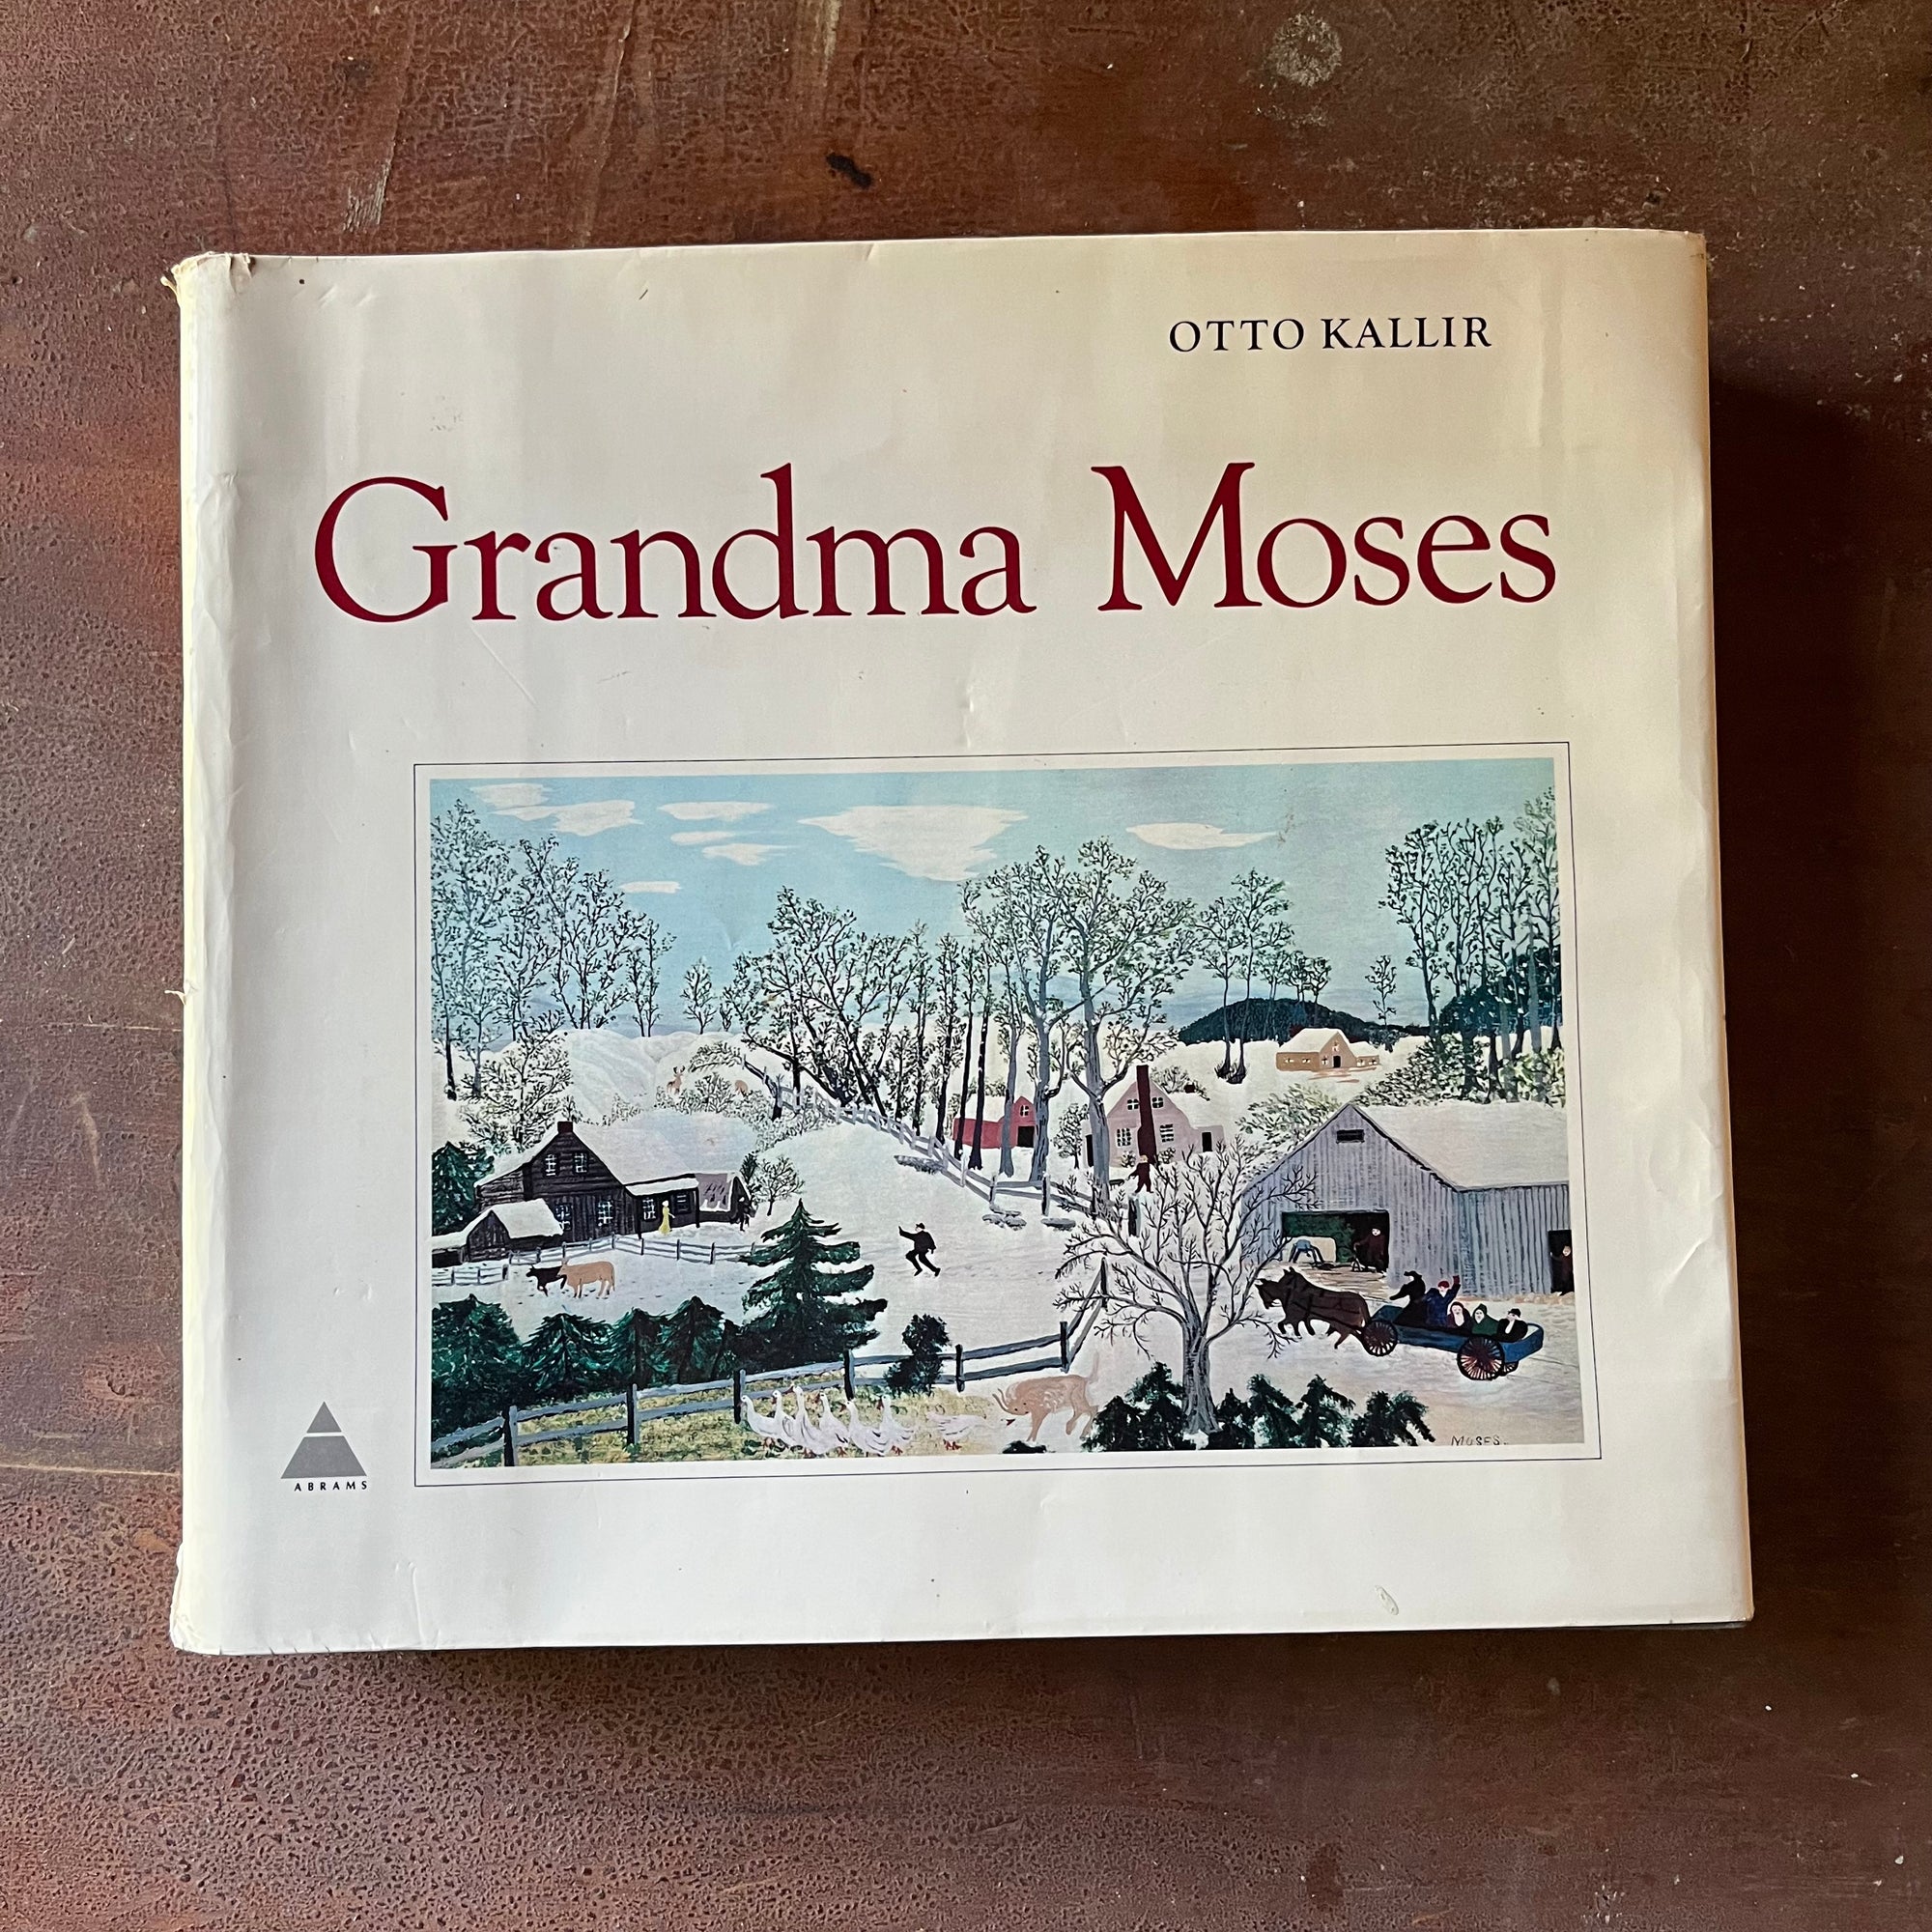 Log Cabin Vintage - vintage non-fiction book, non-fiction book, art book, vintage art book - Grandma Moses Coffee Table Book by Otto Kallir with Dust Jacket - view of the dust jacket's front cover